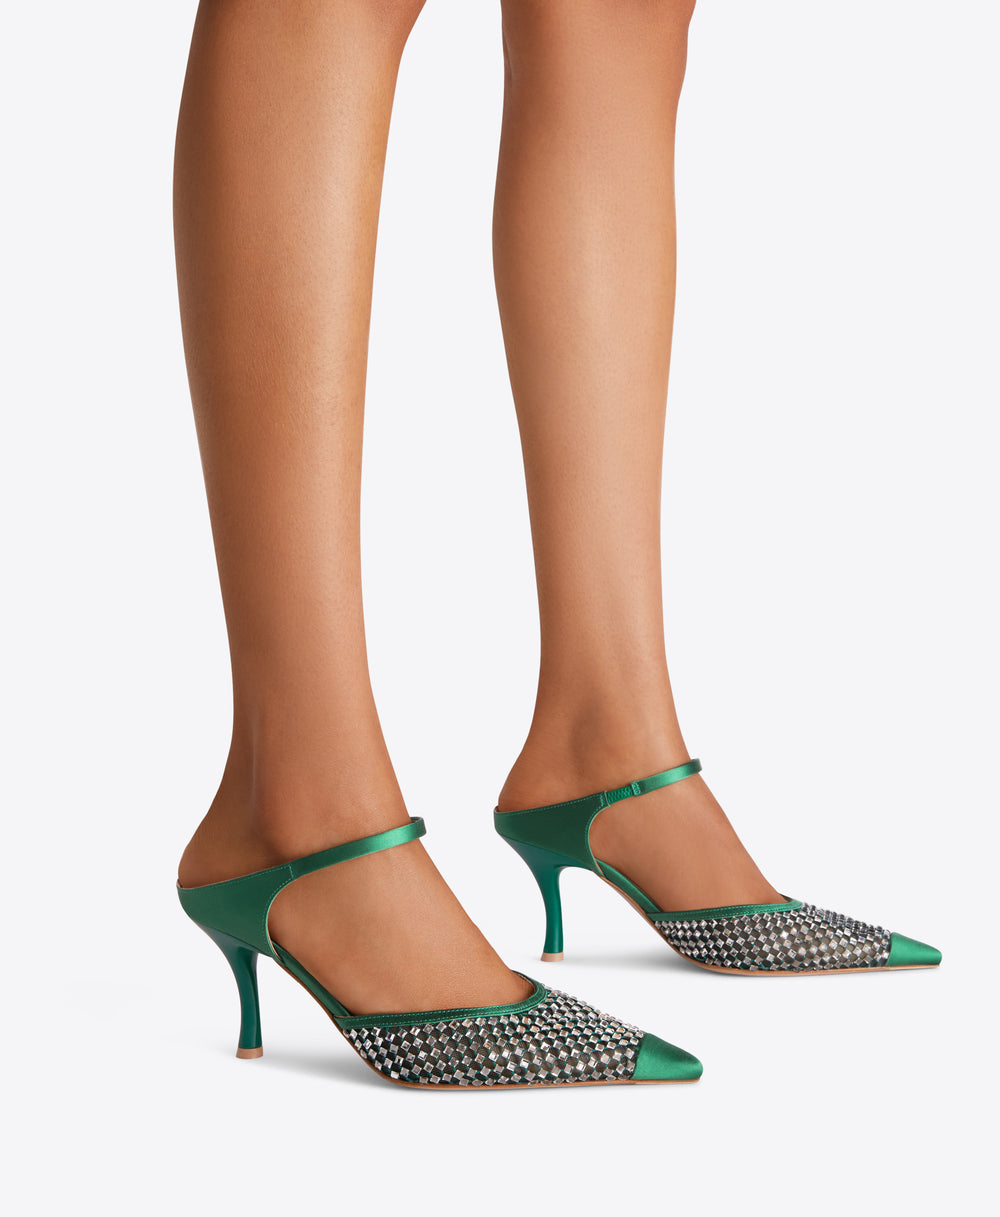 Vega 70 Crystal Mesh Forest Green Satin Mule Malone Souliers